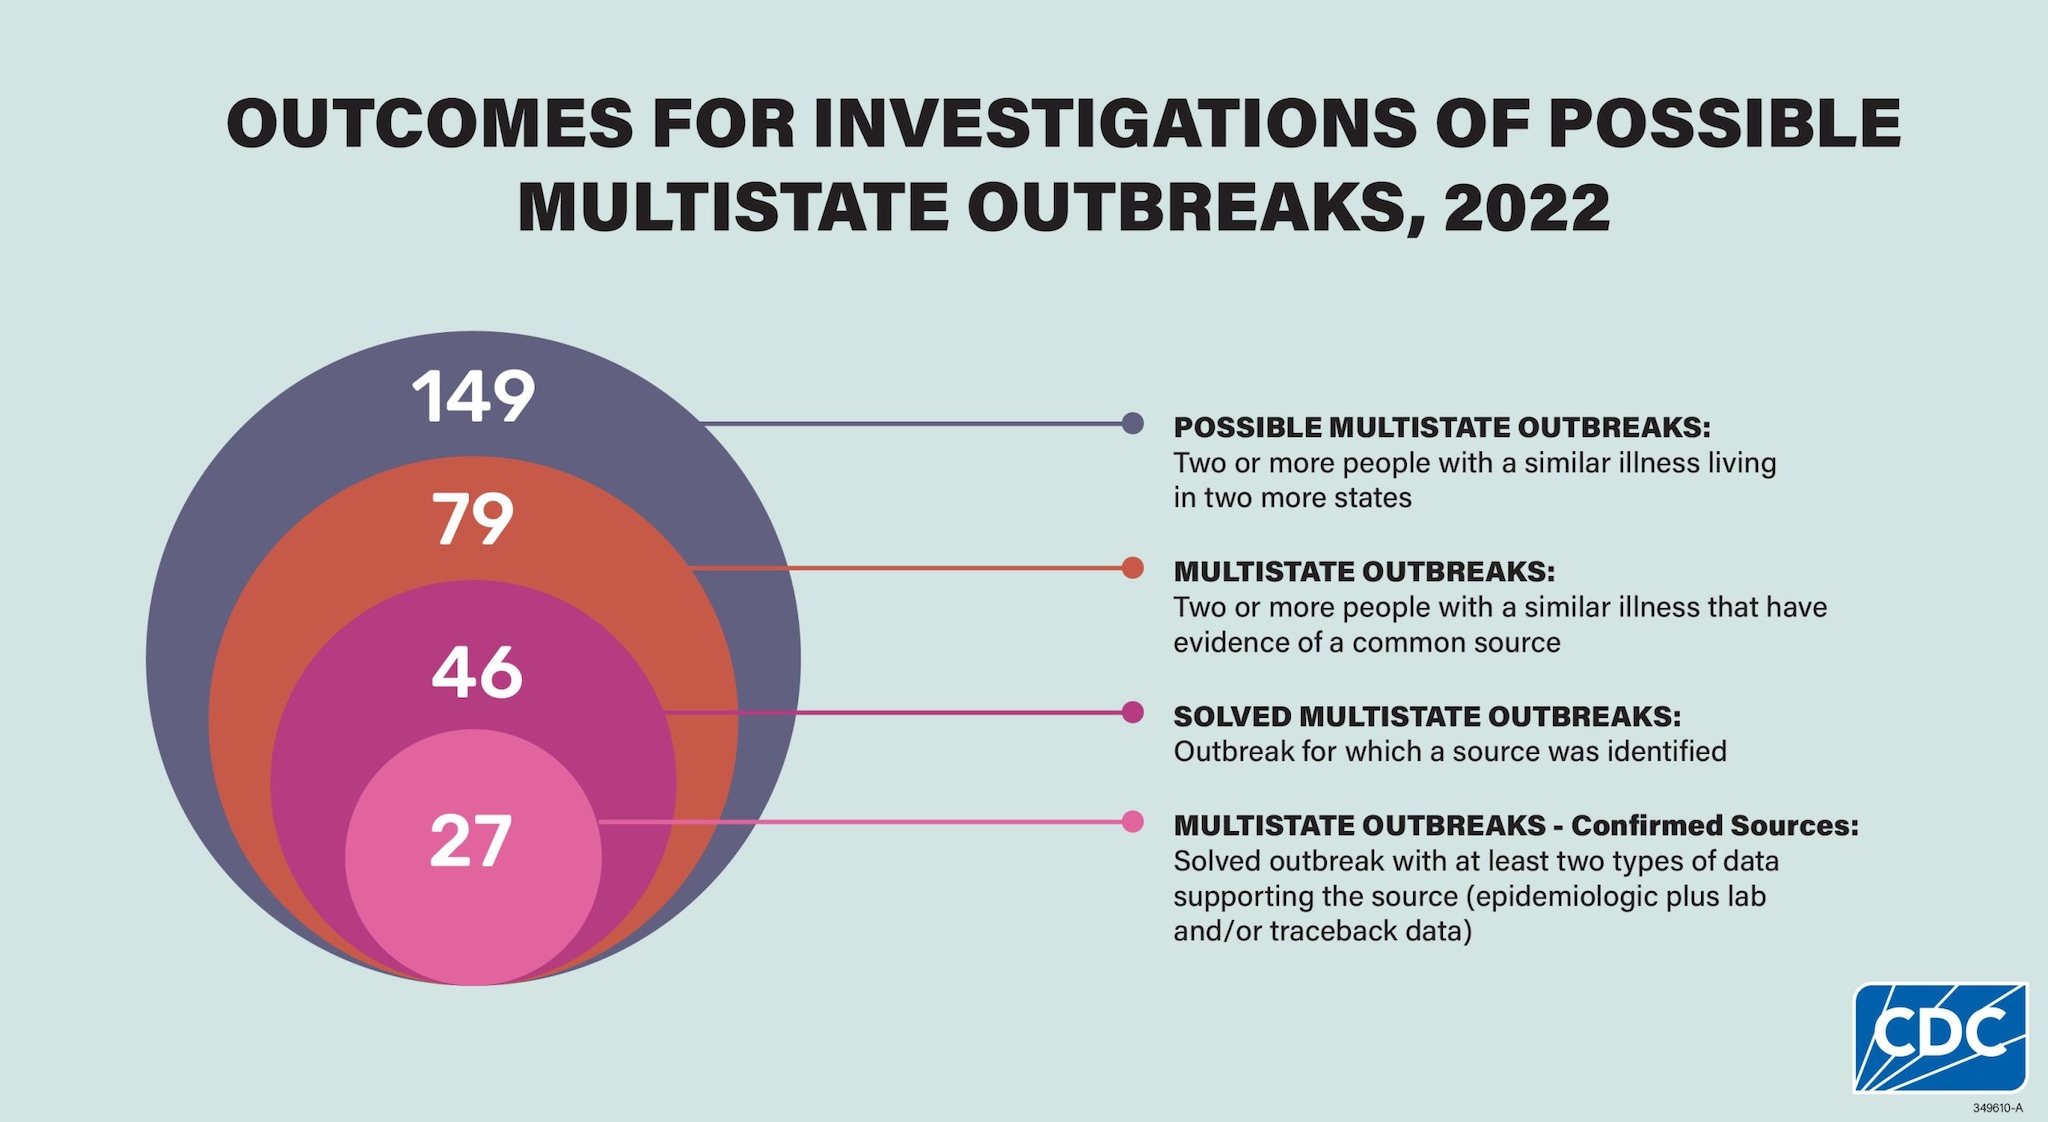 Outcomes for investigations of possible multistate outbreaks, 2022. 149 possible multistate outbreaks: two or more people with a similar illness living in two or more states; 79 multistate outbreaks: two or more people with a similar illness that have evidence of a common source; 46 solved multistate outbreaks: outbreak for which a source was identified; 27 multistate outbreaks-confirmed sources: solved outbreak with at least two types of data supporting the source (epidemiologic plus lab and/or traceback data)